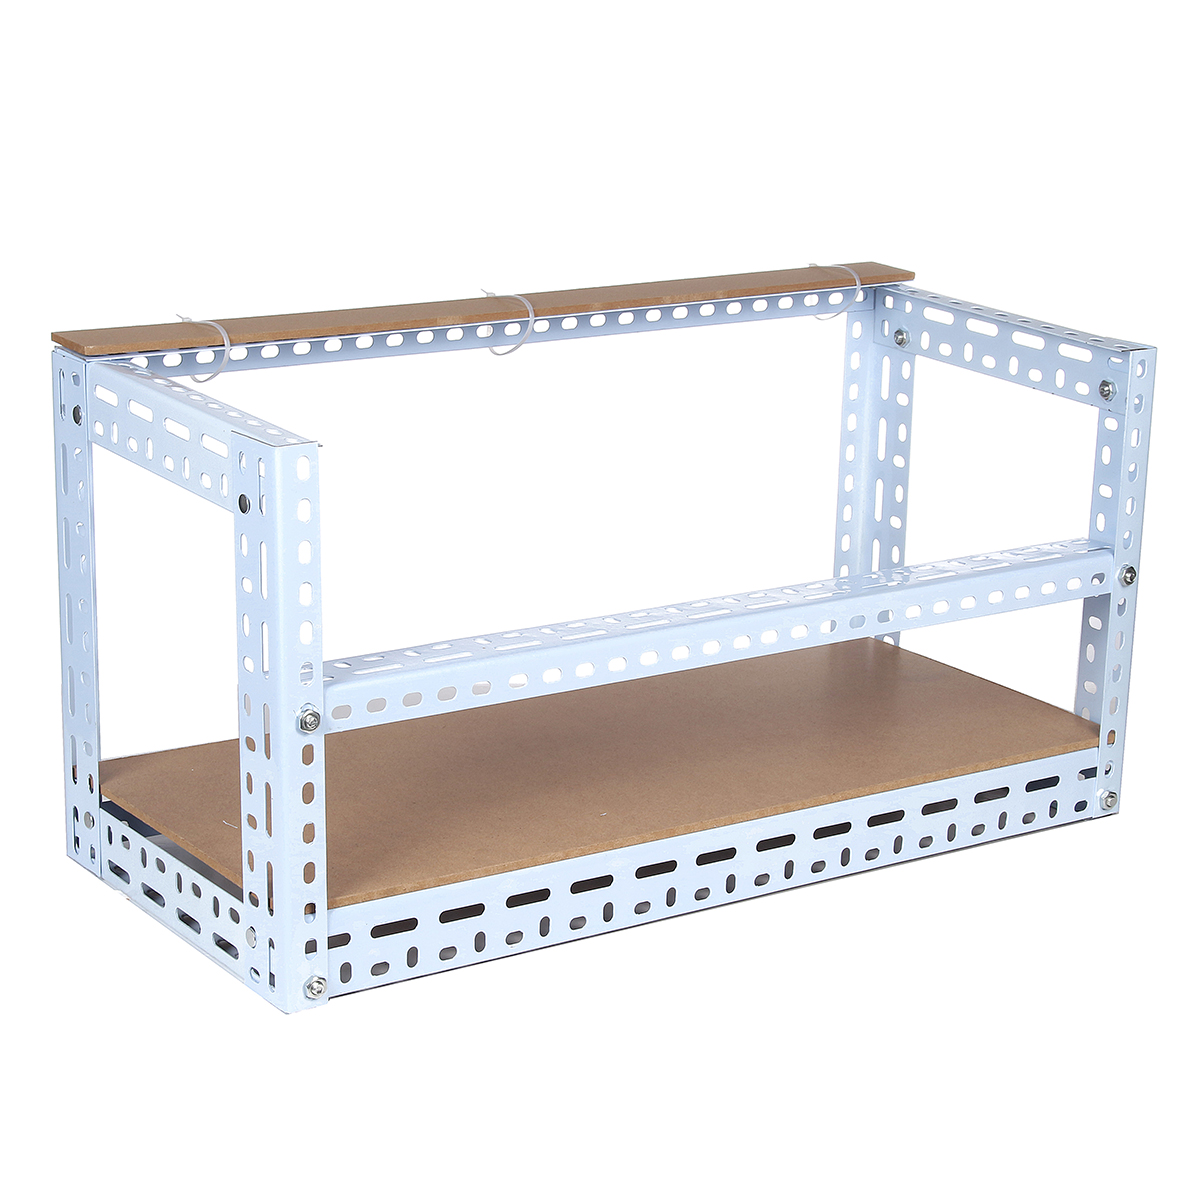 Find Steel Crypto Coin Bitcoin Mining Rig Frame Case Shelf Set For 6 GPU for Sale on Gipsybee.com with cryptocurrencies